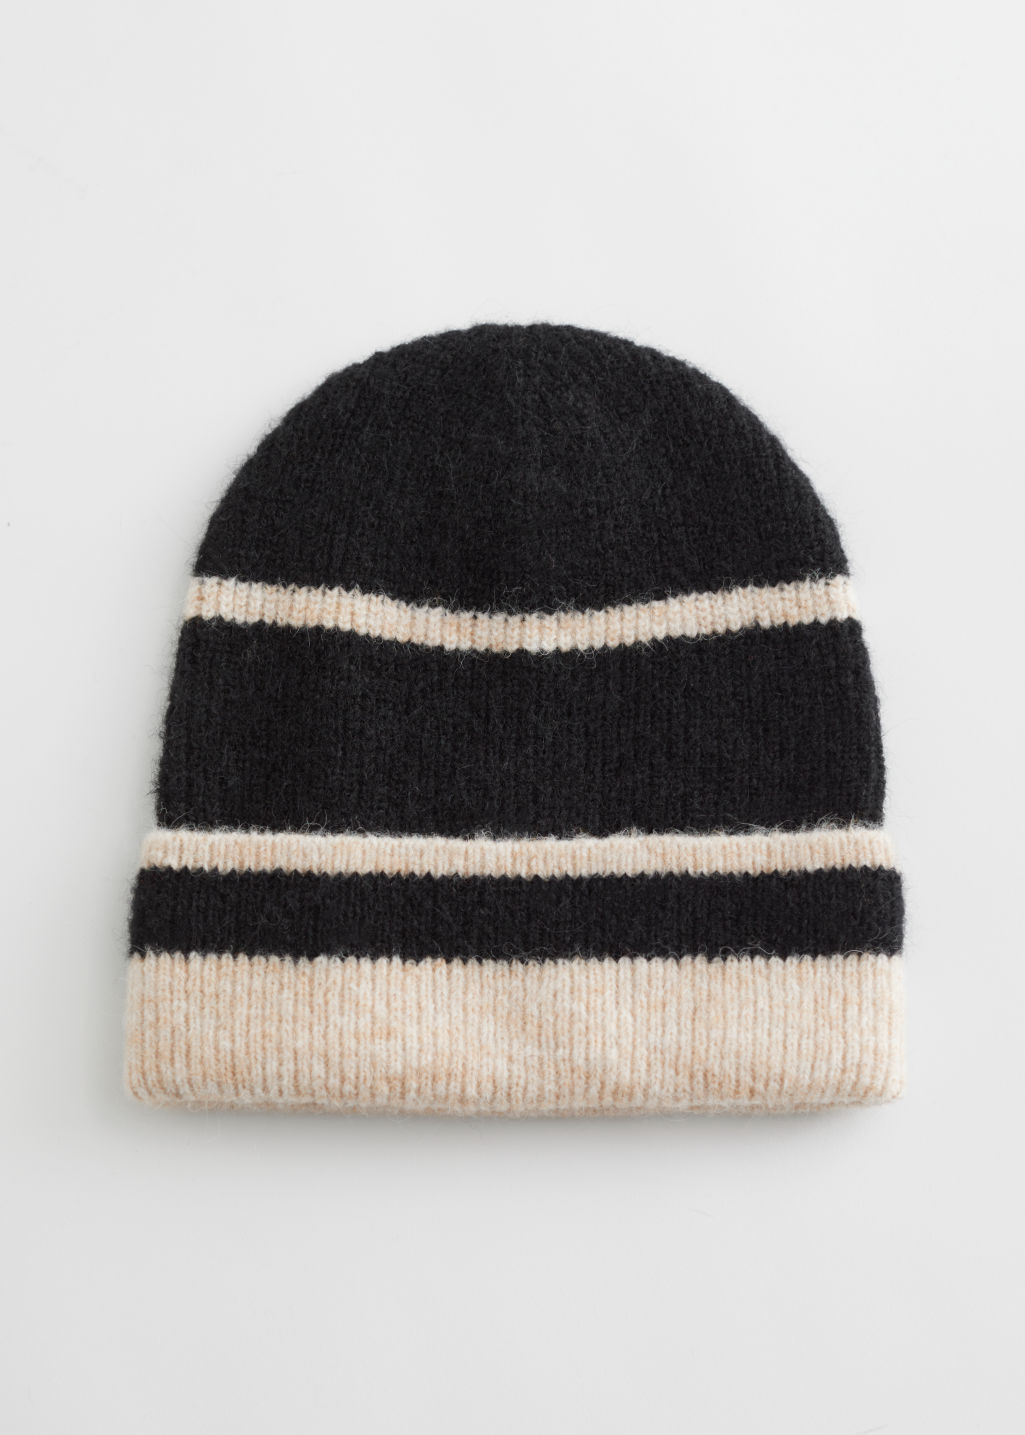 Striped Wool Blend Beanie - Black, White - Beanies - & Other Stories